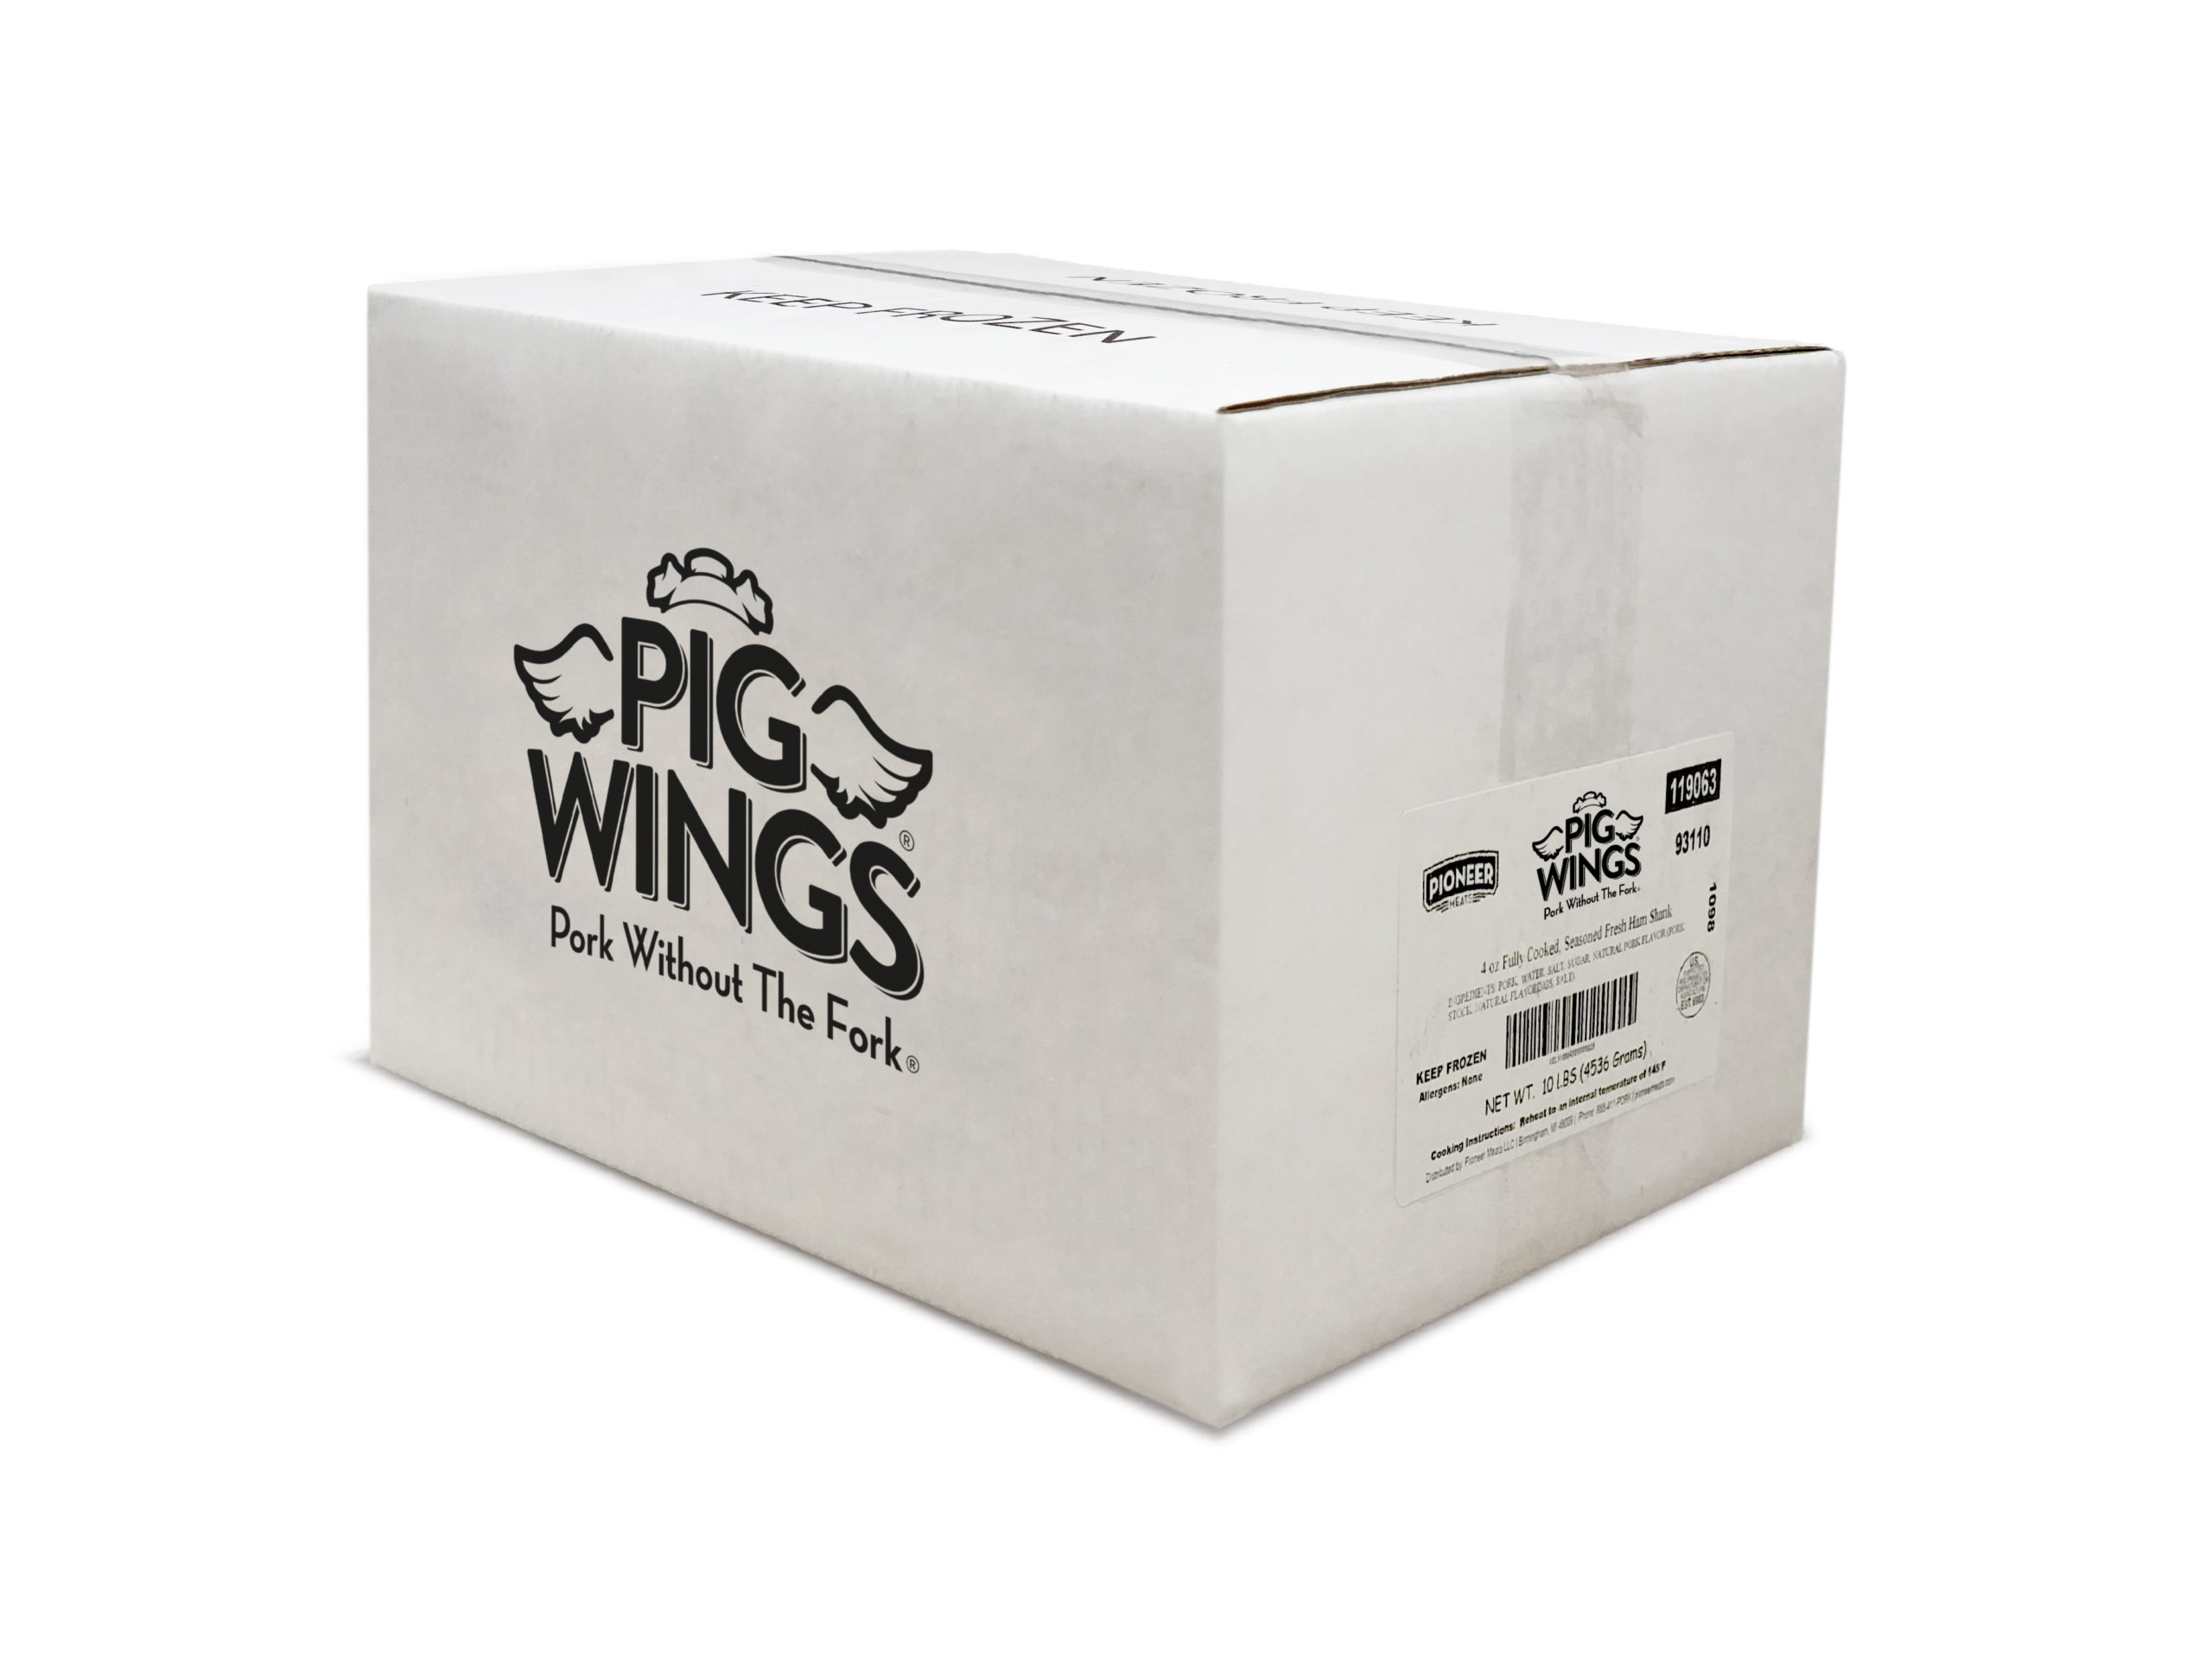 Box_of_Pig_Wings_packaged_ready_to_be_shipped_to_retailers